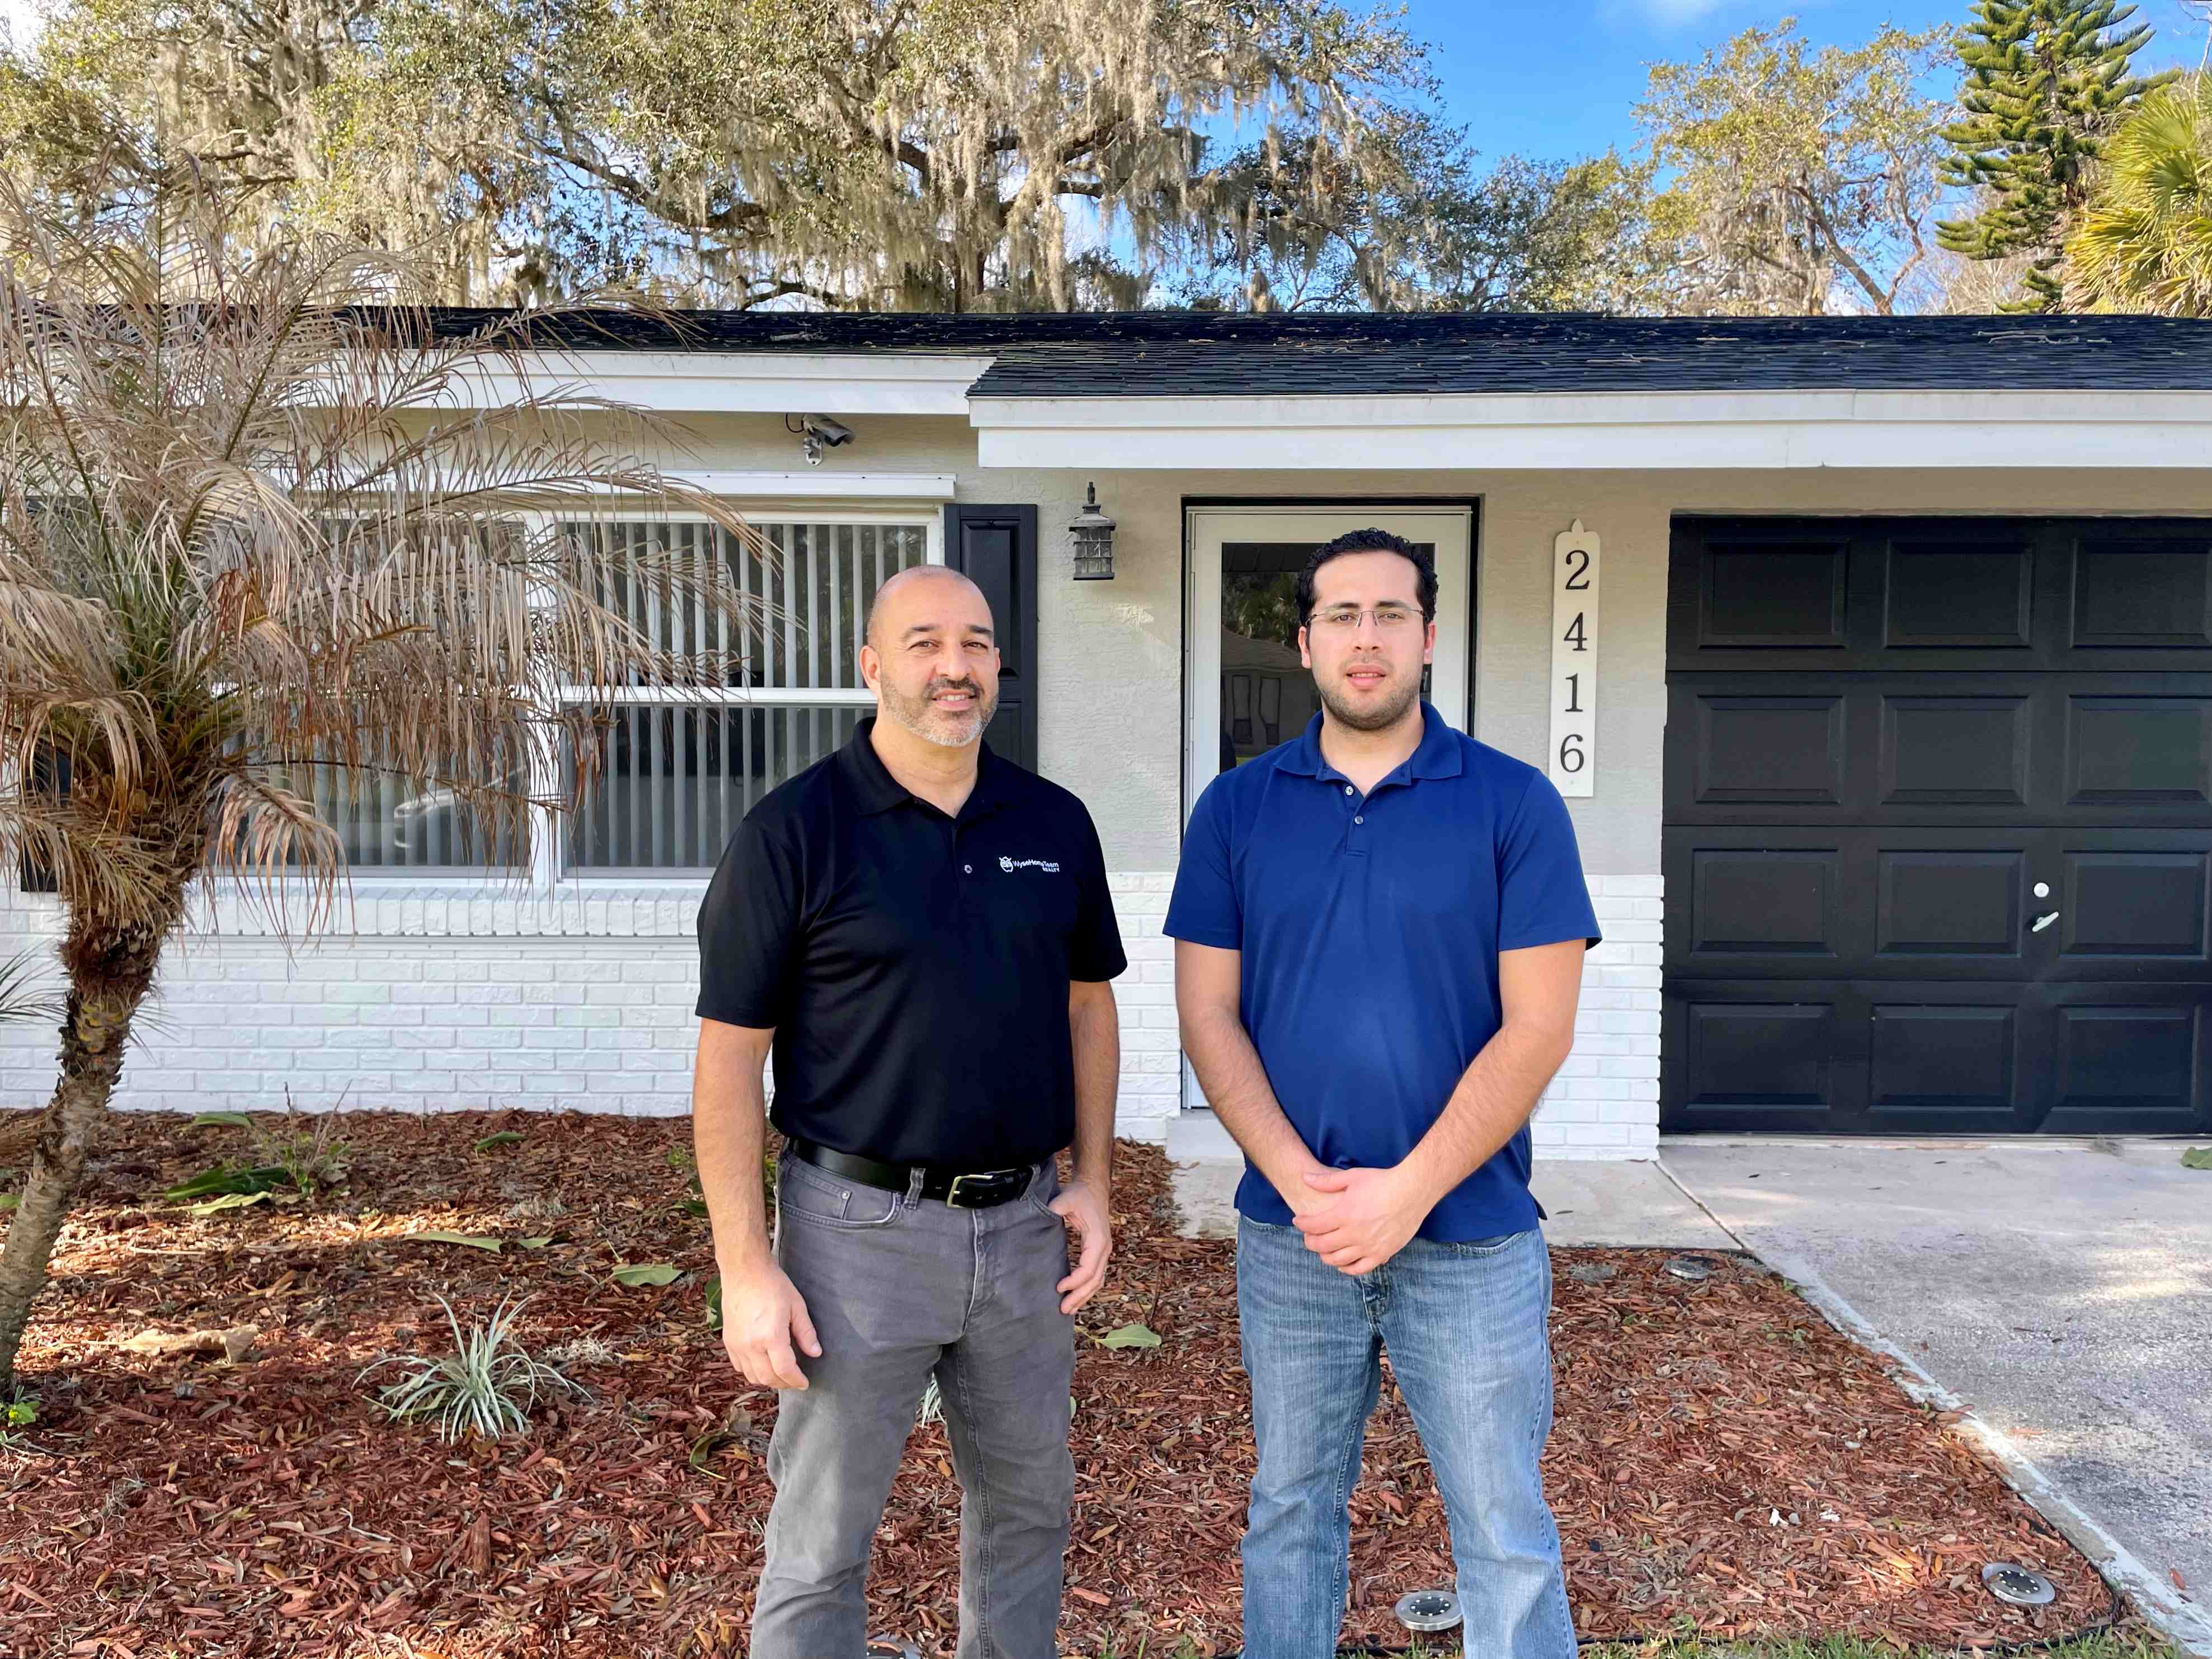 Ron and his client in front of their new home